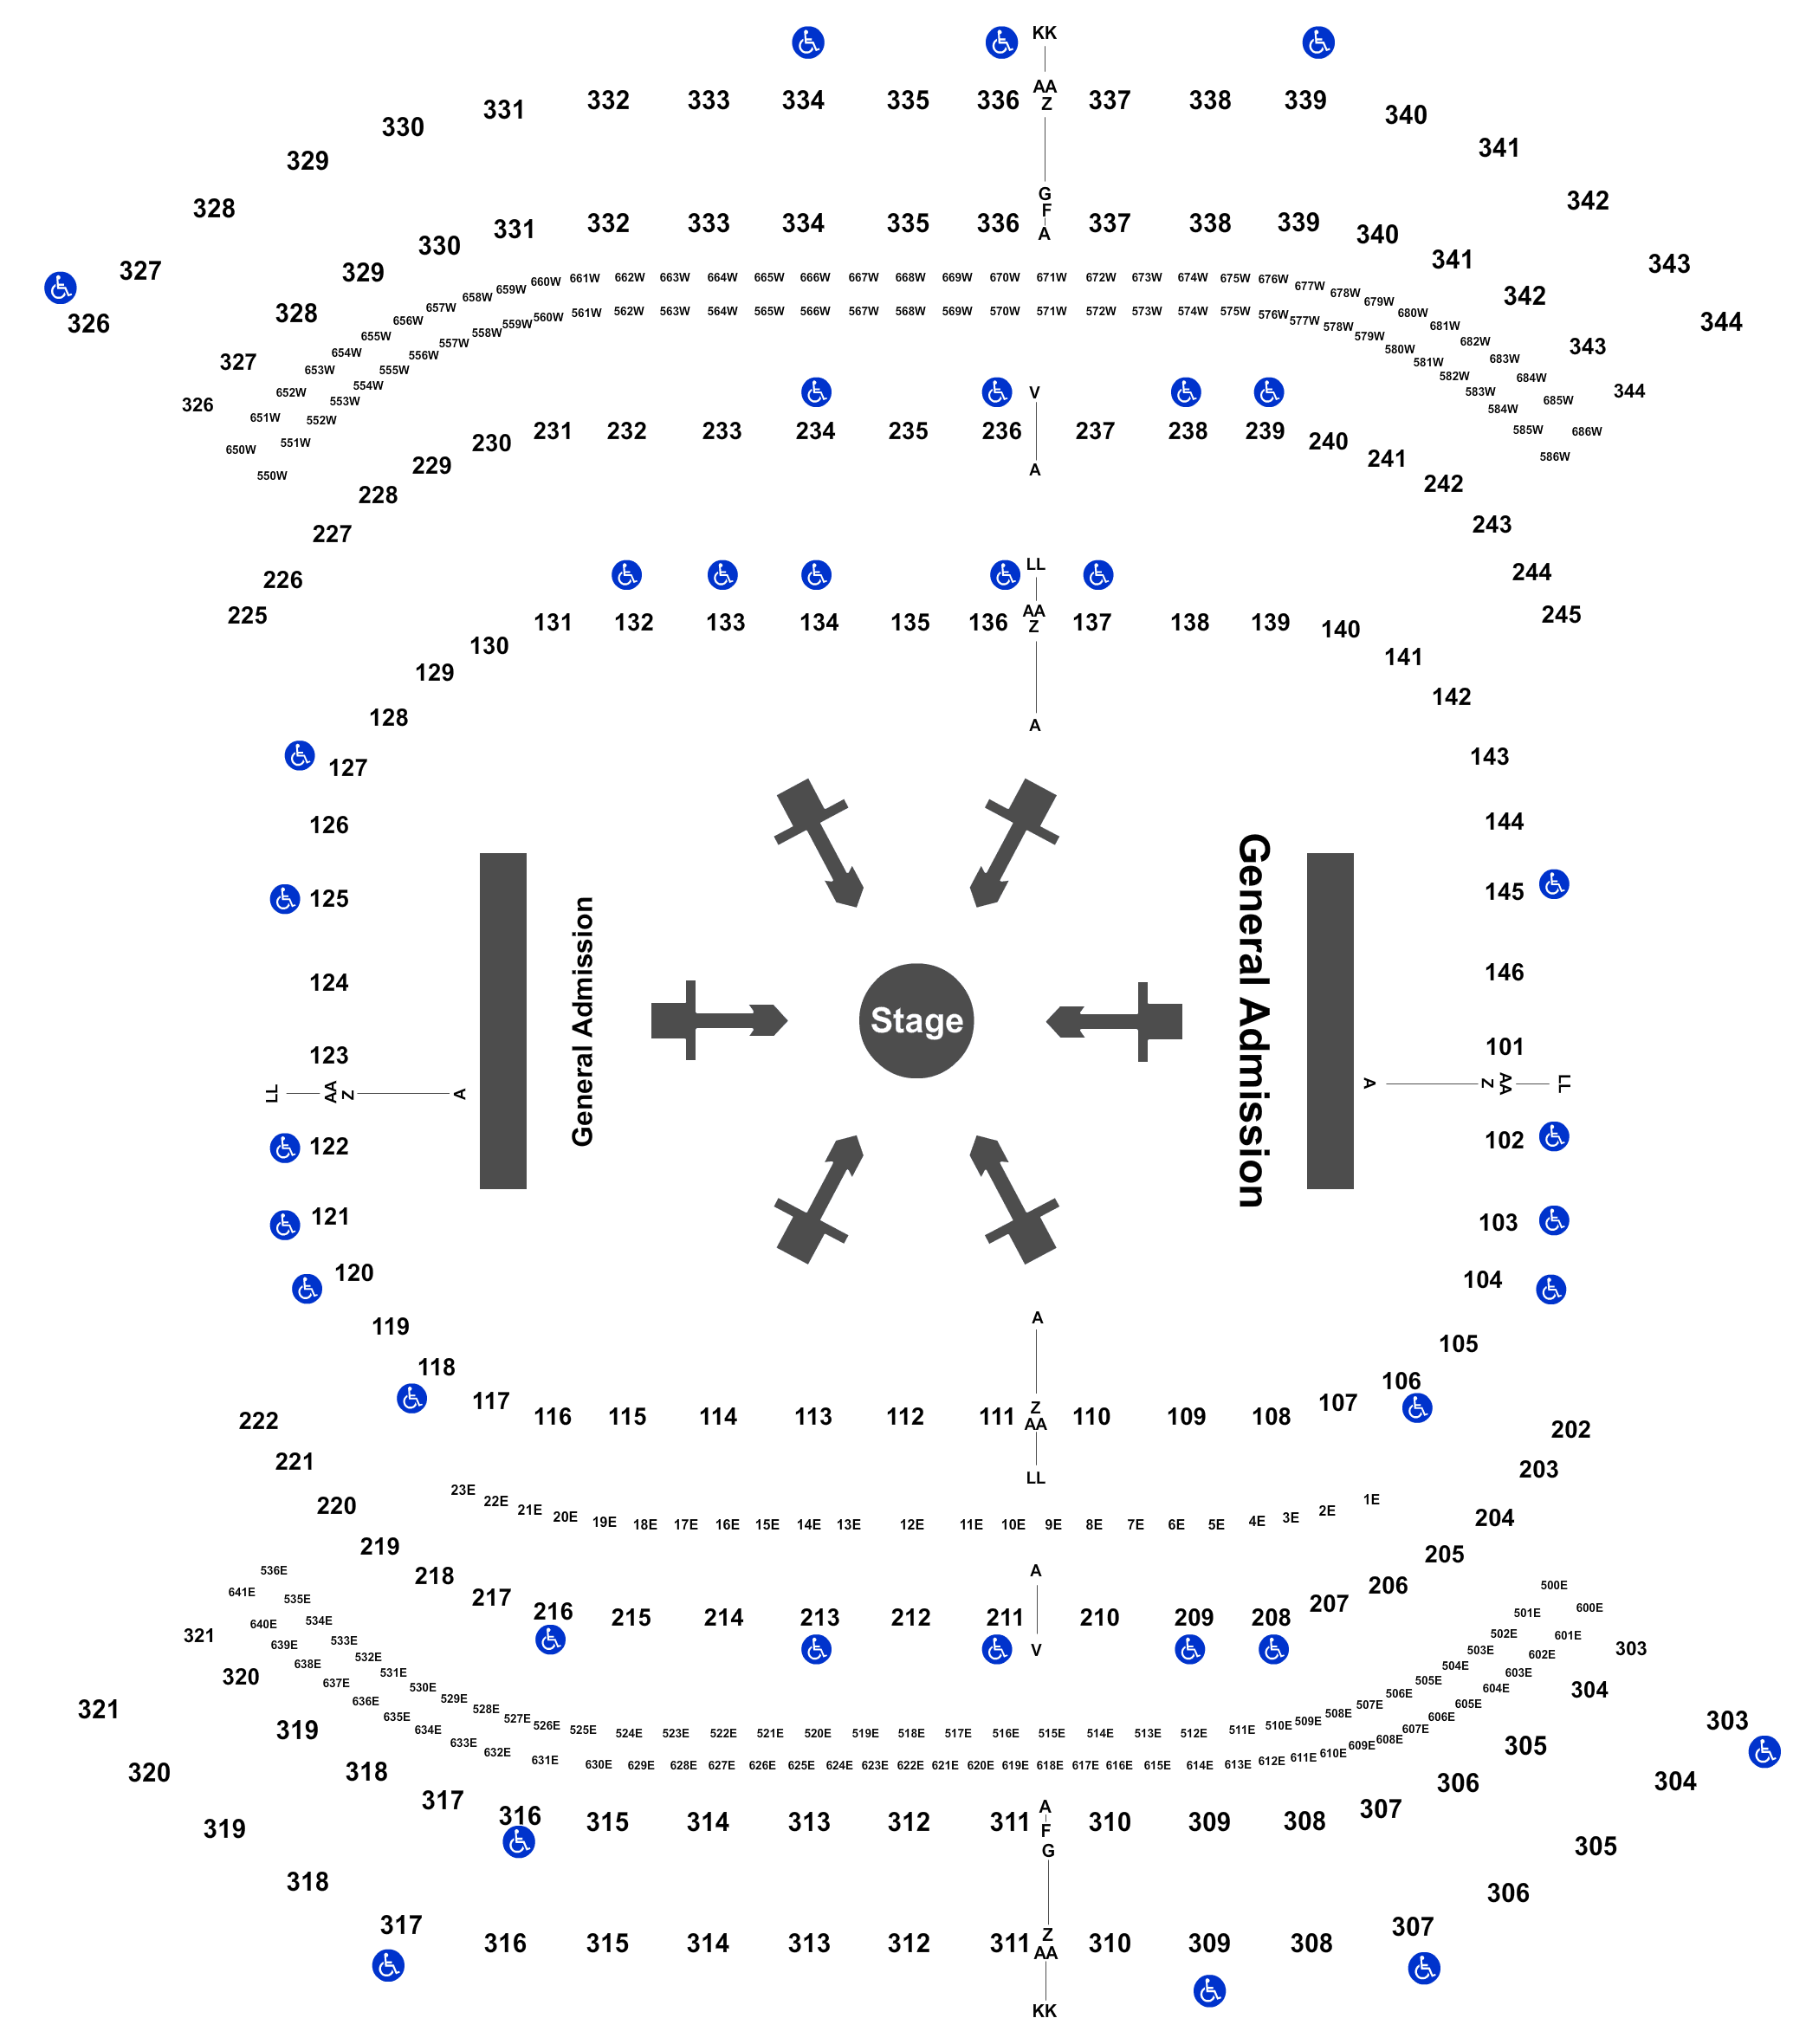 Learn About 105 Imagen Nissan Stadium Seating Chart With Rows And Seat